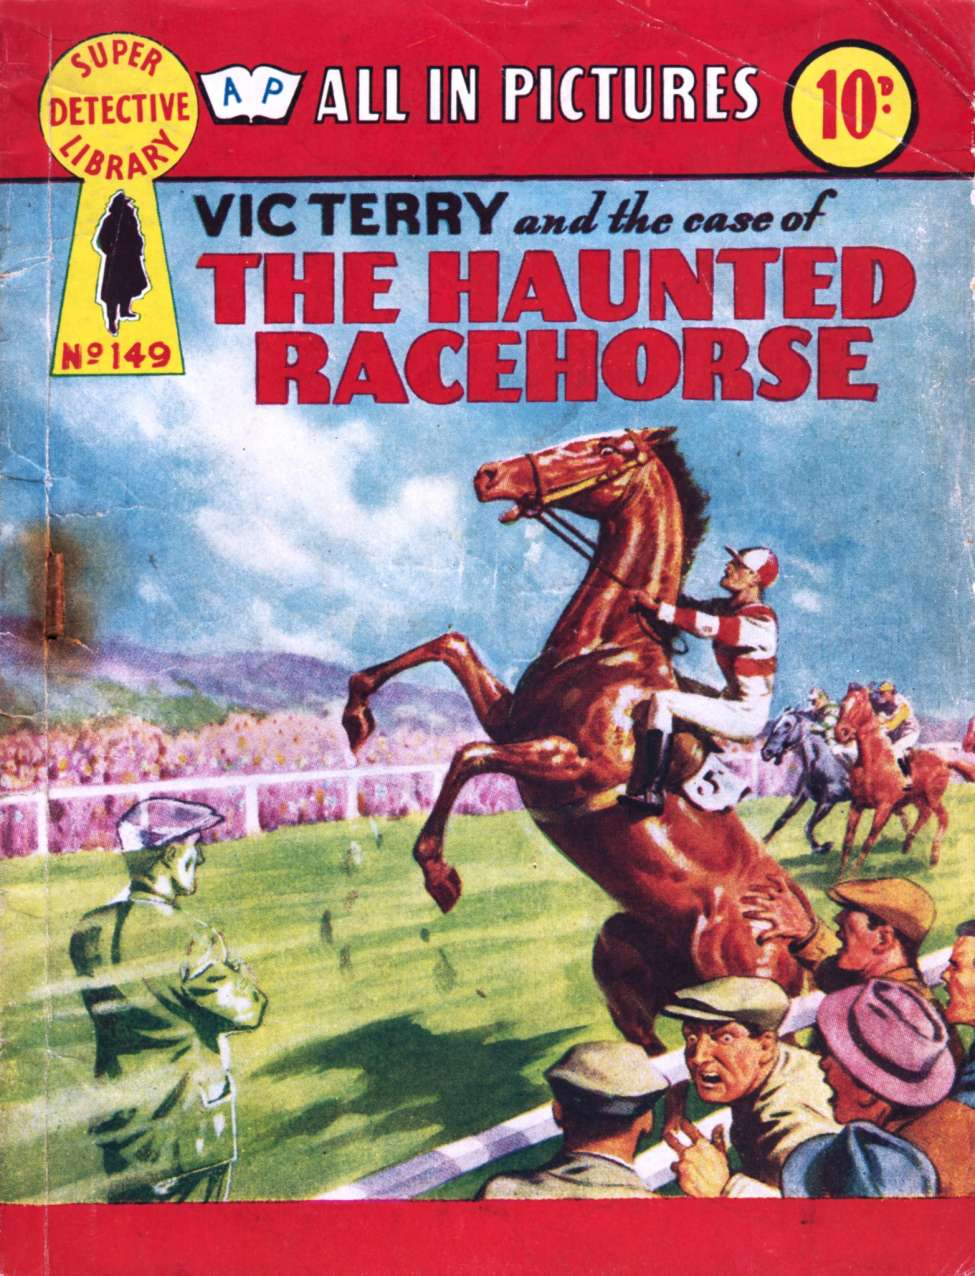 Book Cover For Super Detective Library 149 - Vic Terry-Case of The Haunted Racehorse.